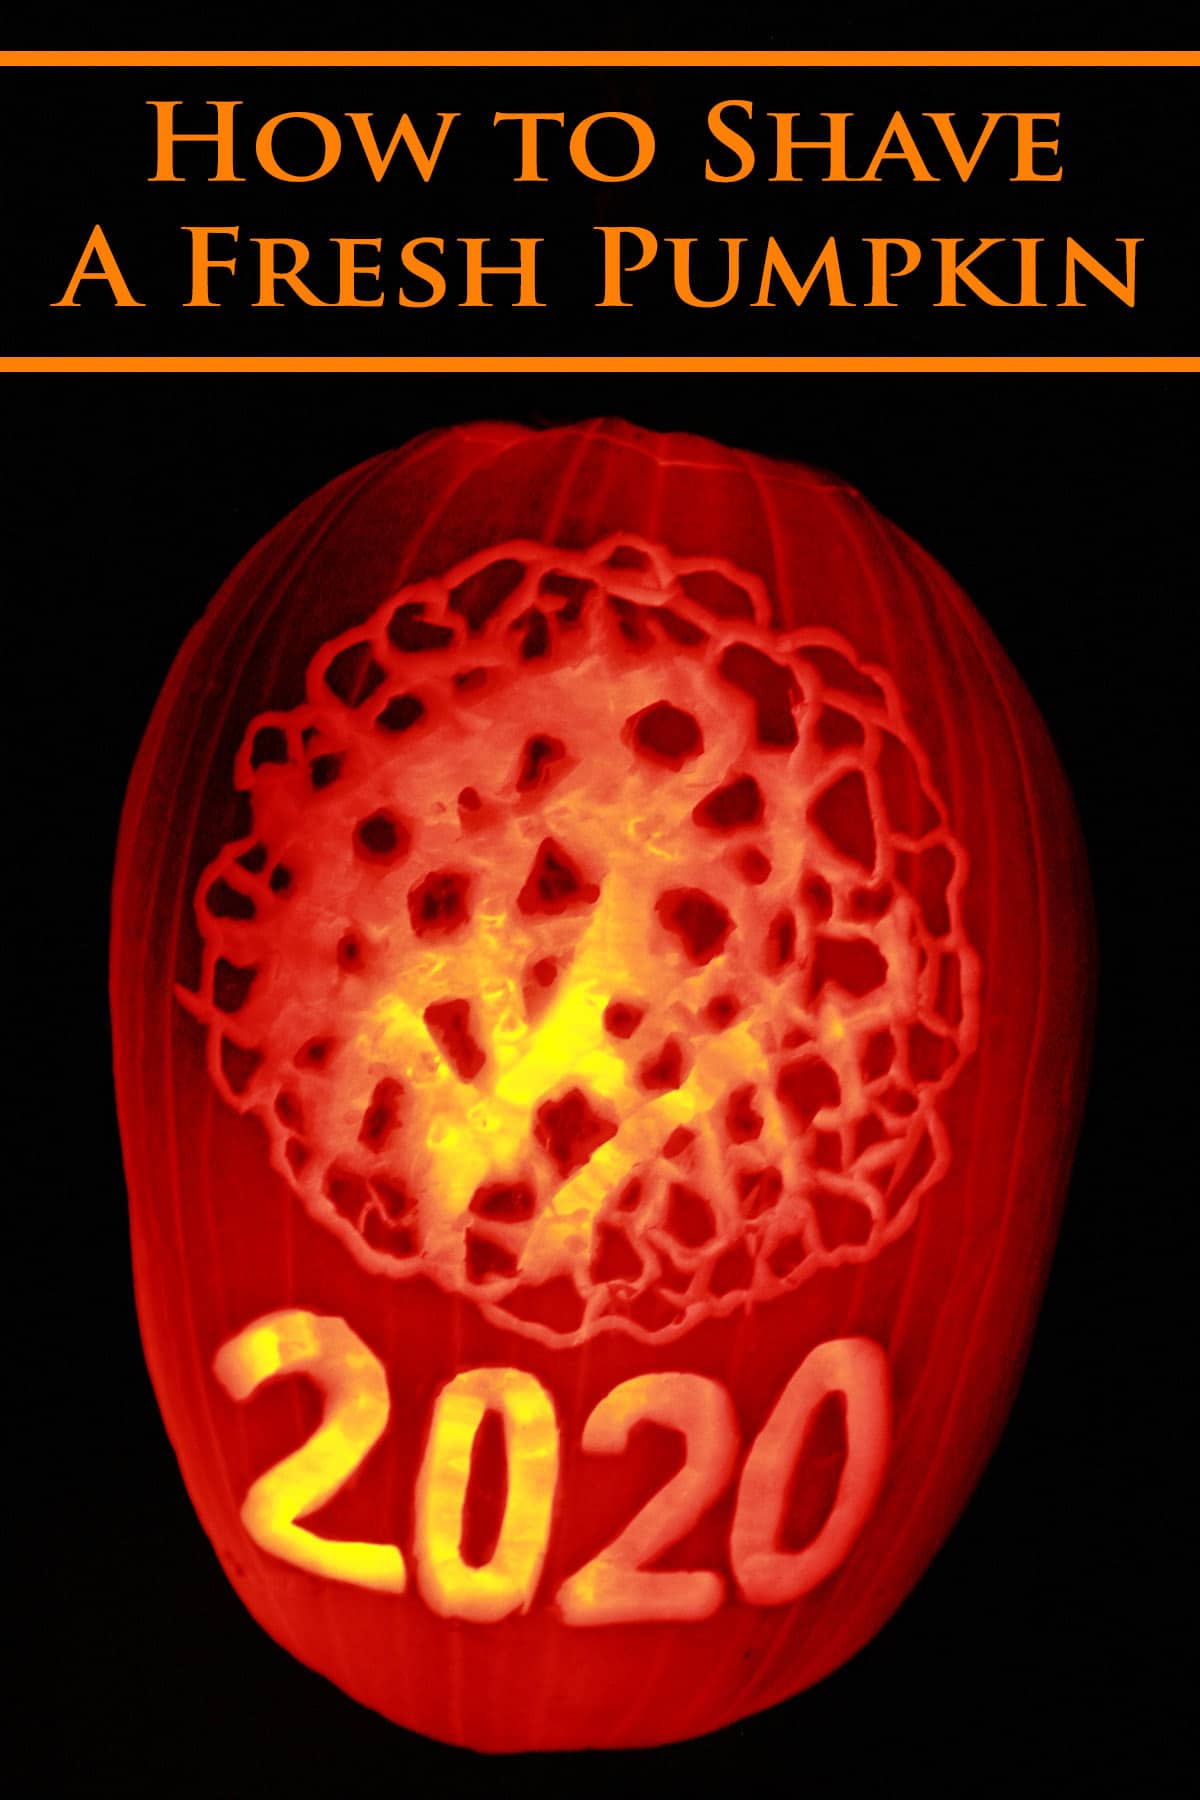 A Halloween pumpkin carved with a coronavirus design and 2020.